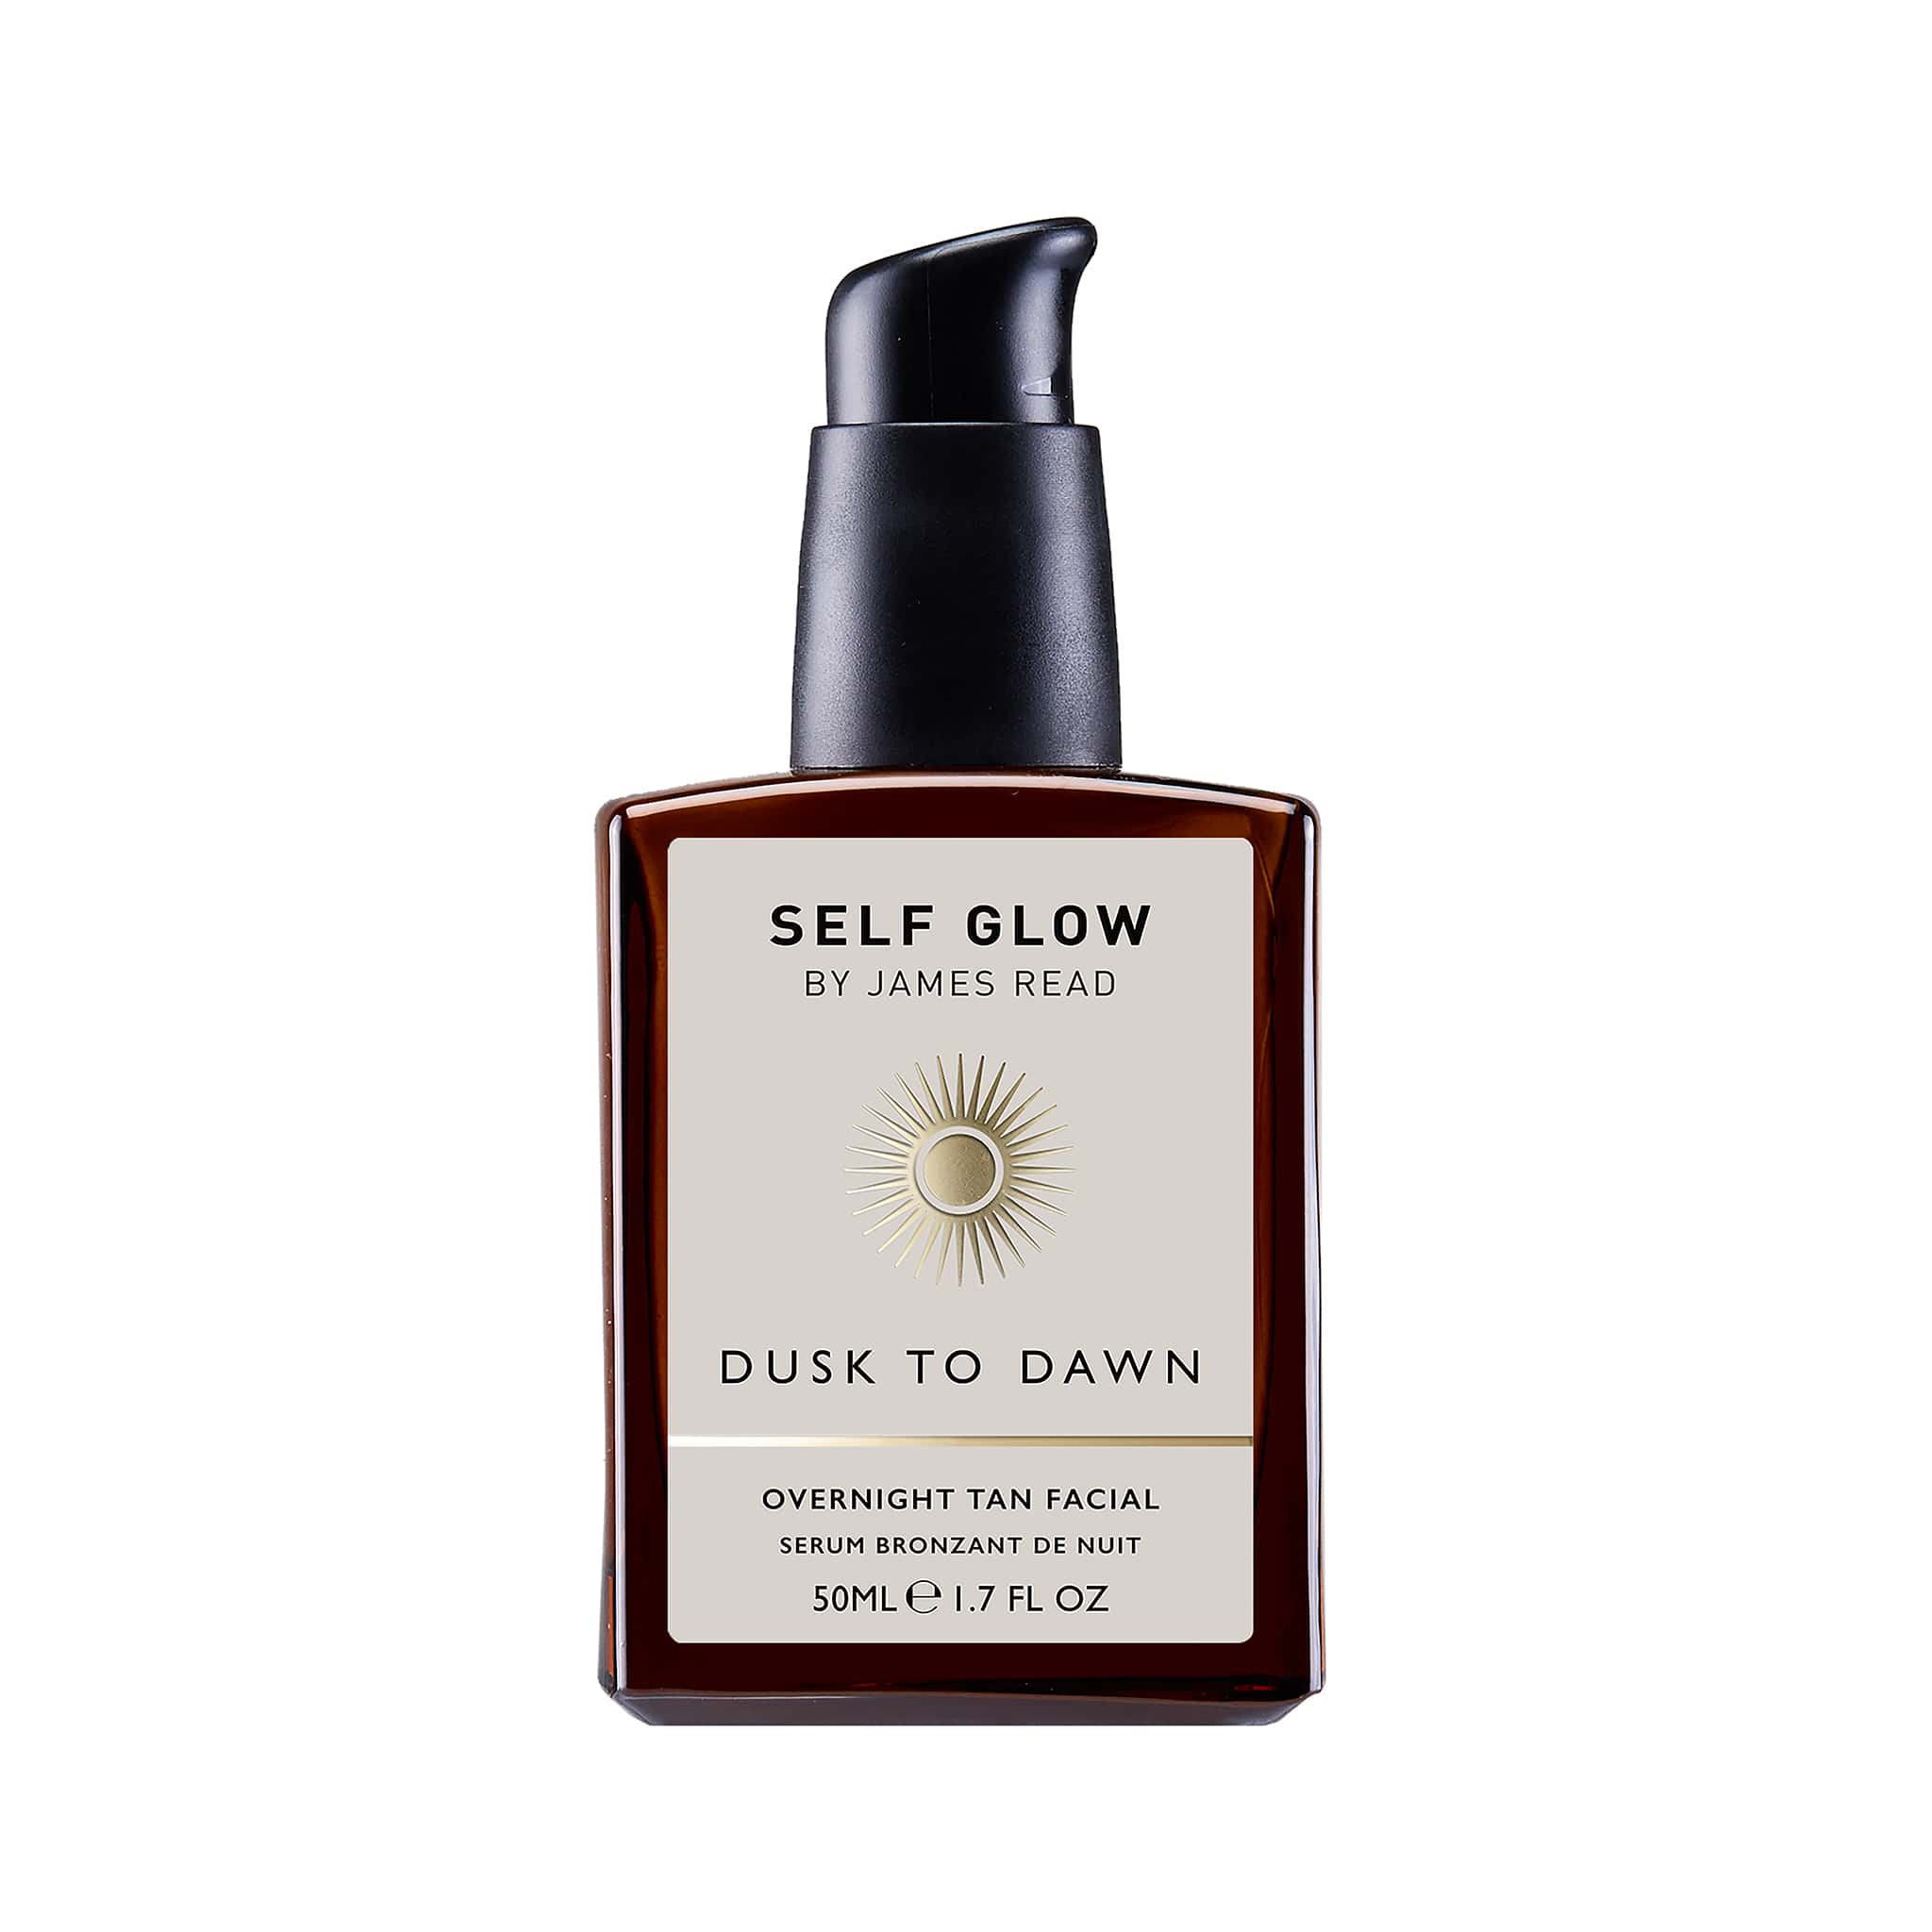 Self Glow by James Read Dusk to Dawn Overnight Tan Facial product image on a plain white background.